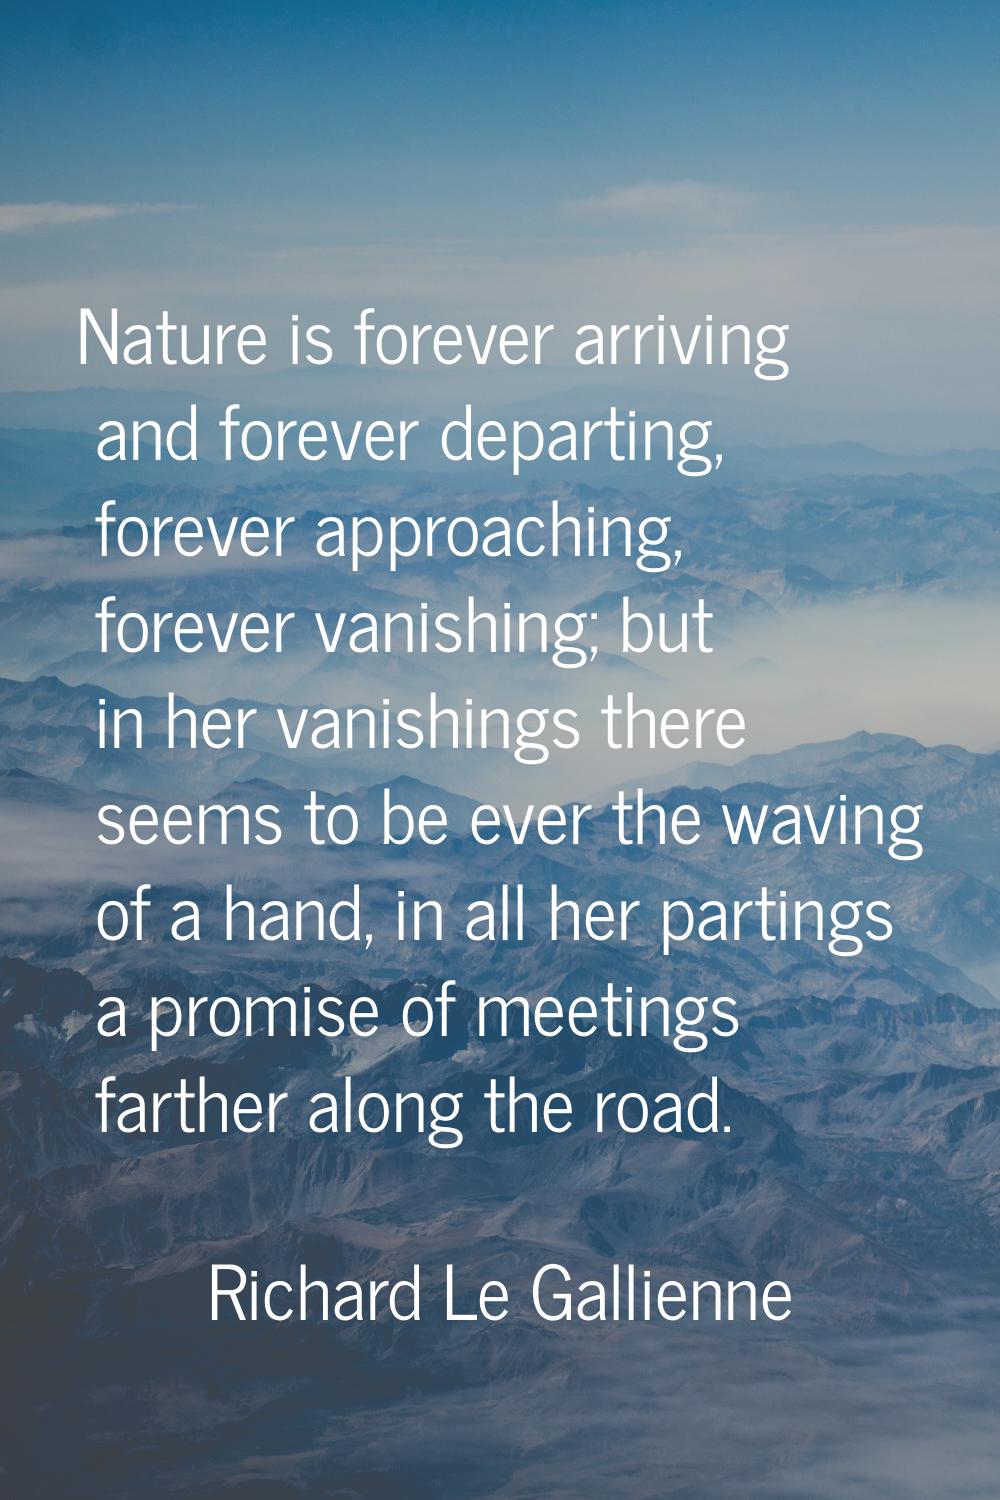 Nature is forever arriving and forever departing, forever approaching, forever vanishing; but in he